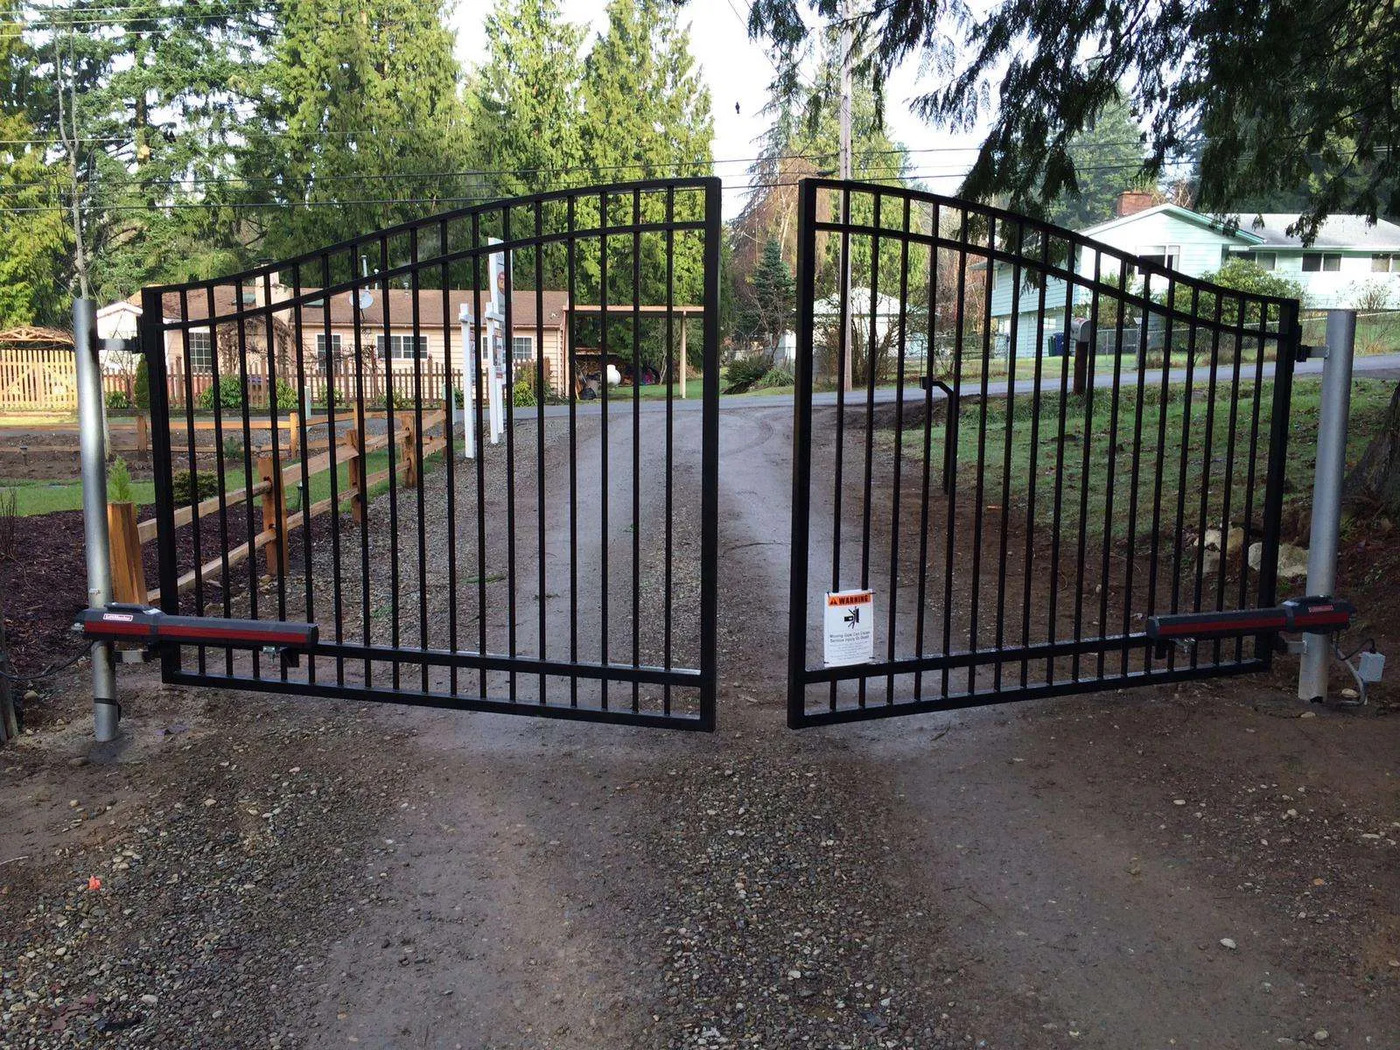 With its vast knowledge of electric gate automation systems, gate operators, and repair parts, as well as its top-notch products and exceptional customer support, the company has become the no. 1 choice for gate installation in Washington.